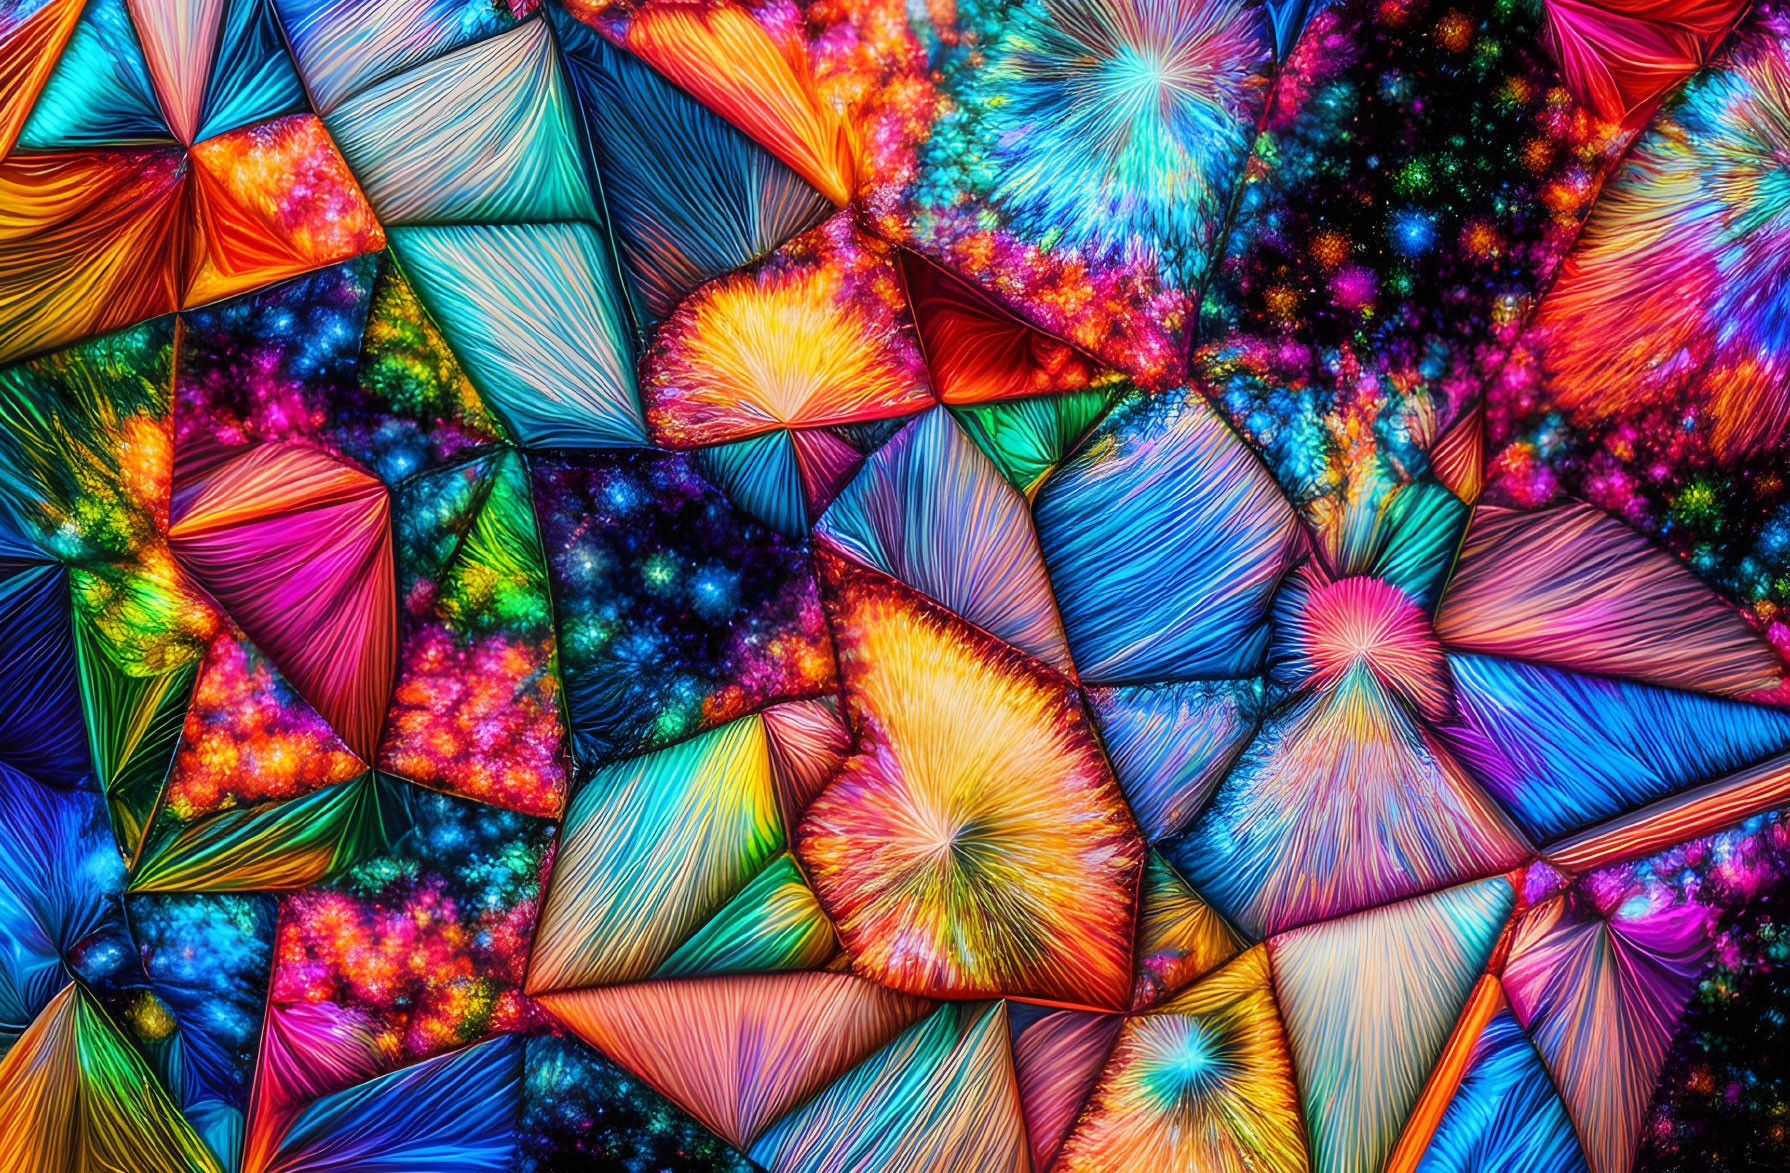 Vivid Abstract Image: Colorful Geometric Crystal Shapes on Starry Background